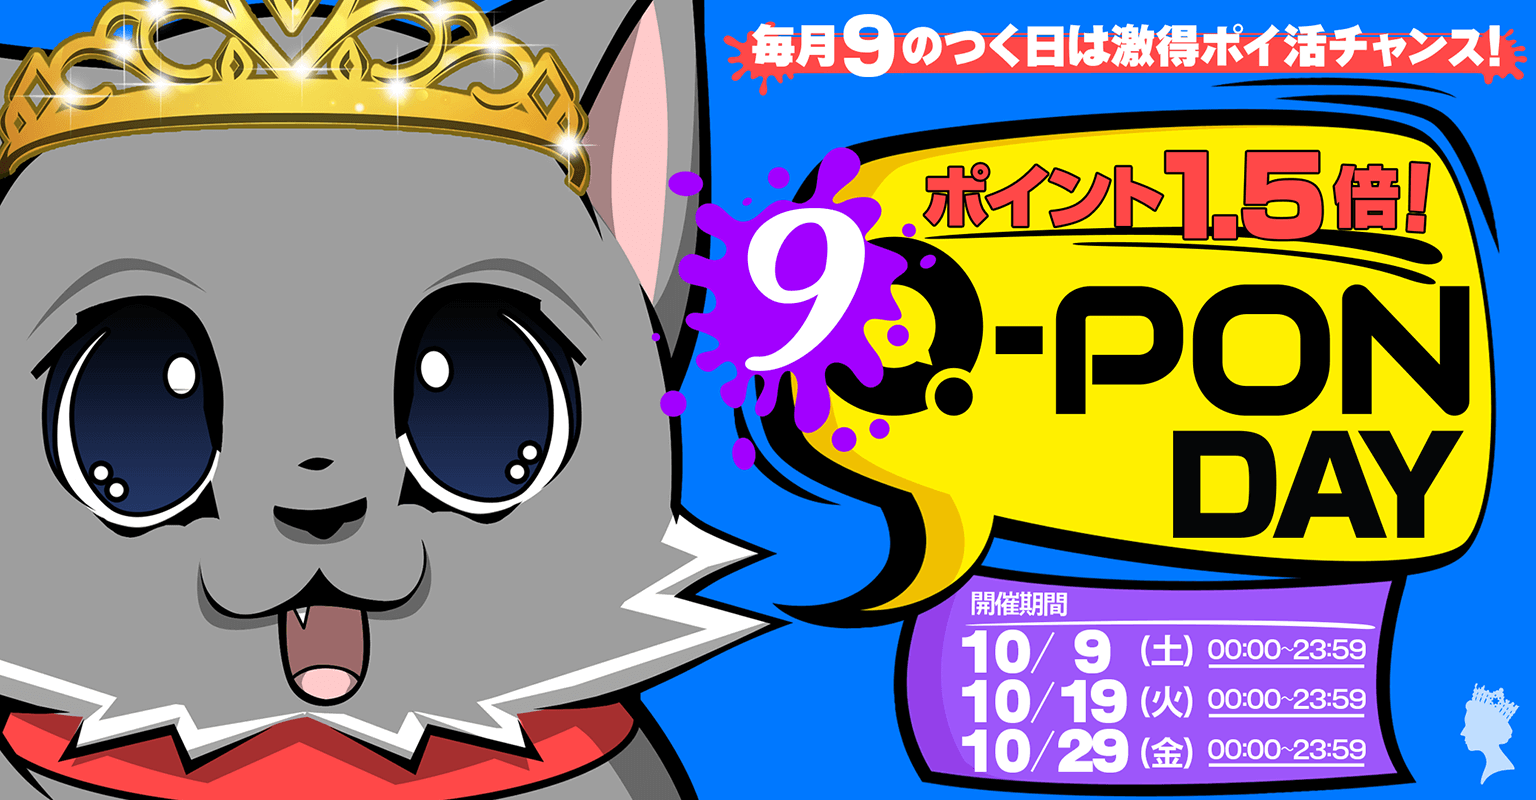 Every 9th October, we will give away a Q-PON points bonus. Earn x1.5 Q-PON points during this event. It is open to all payment methods in Queen Casino.